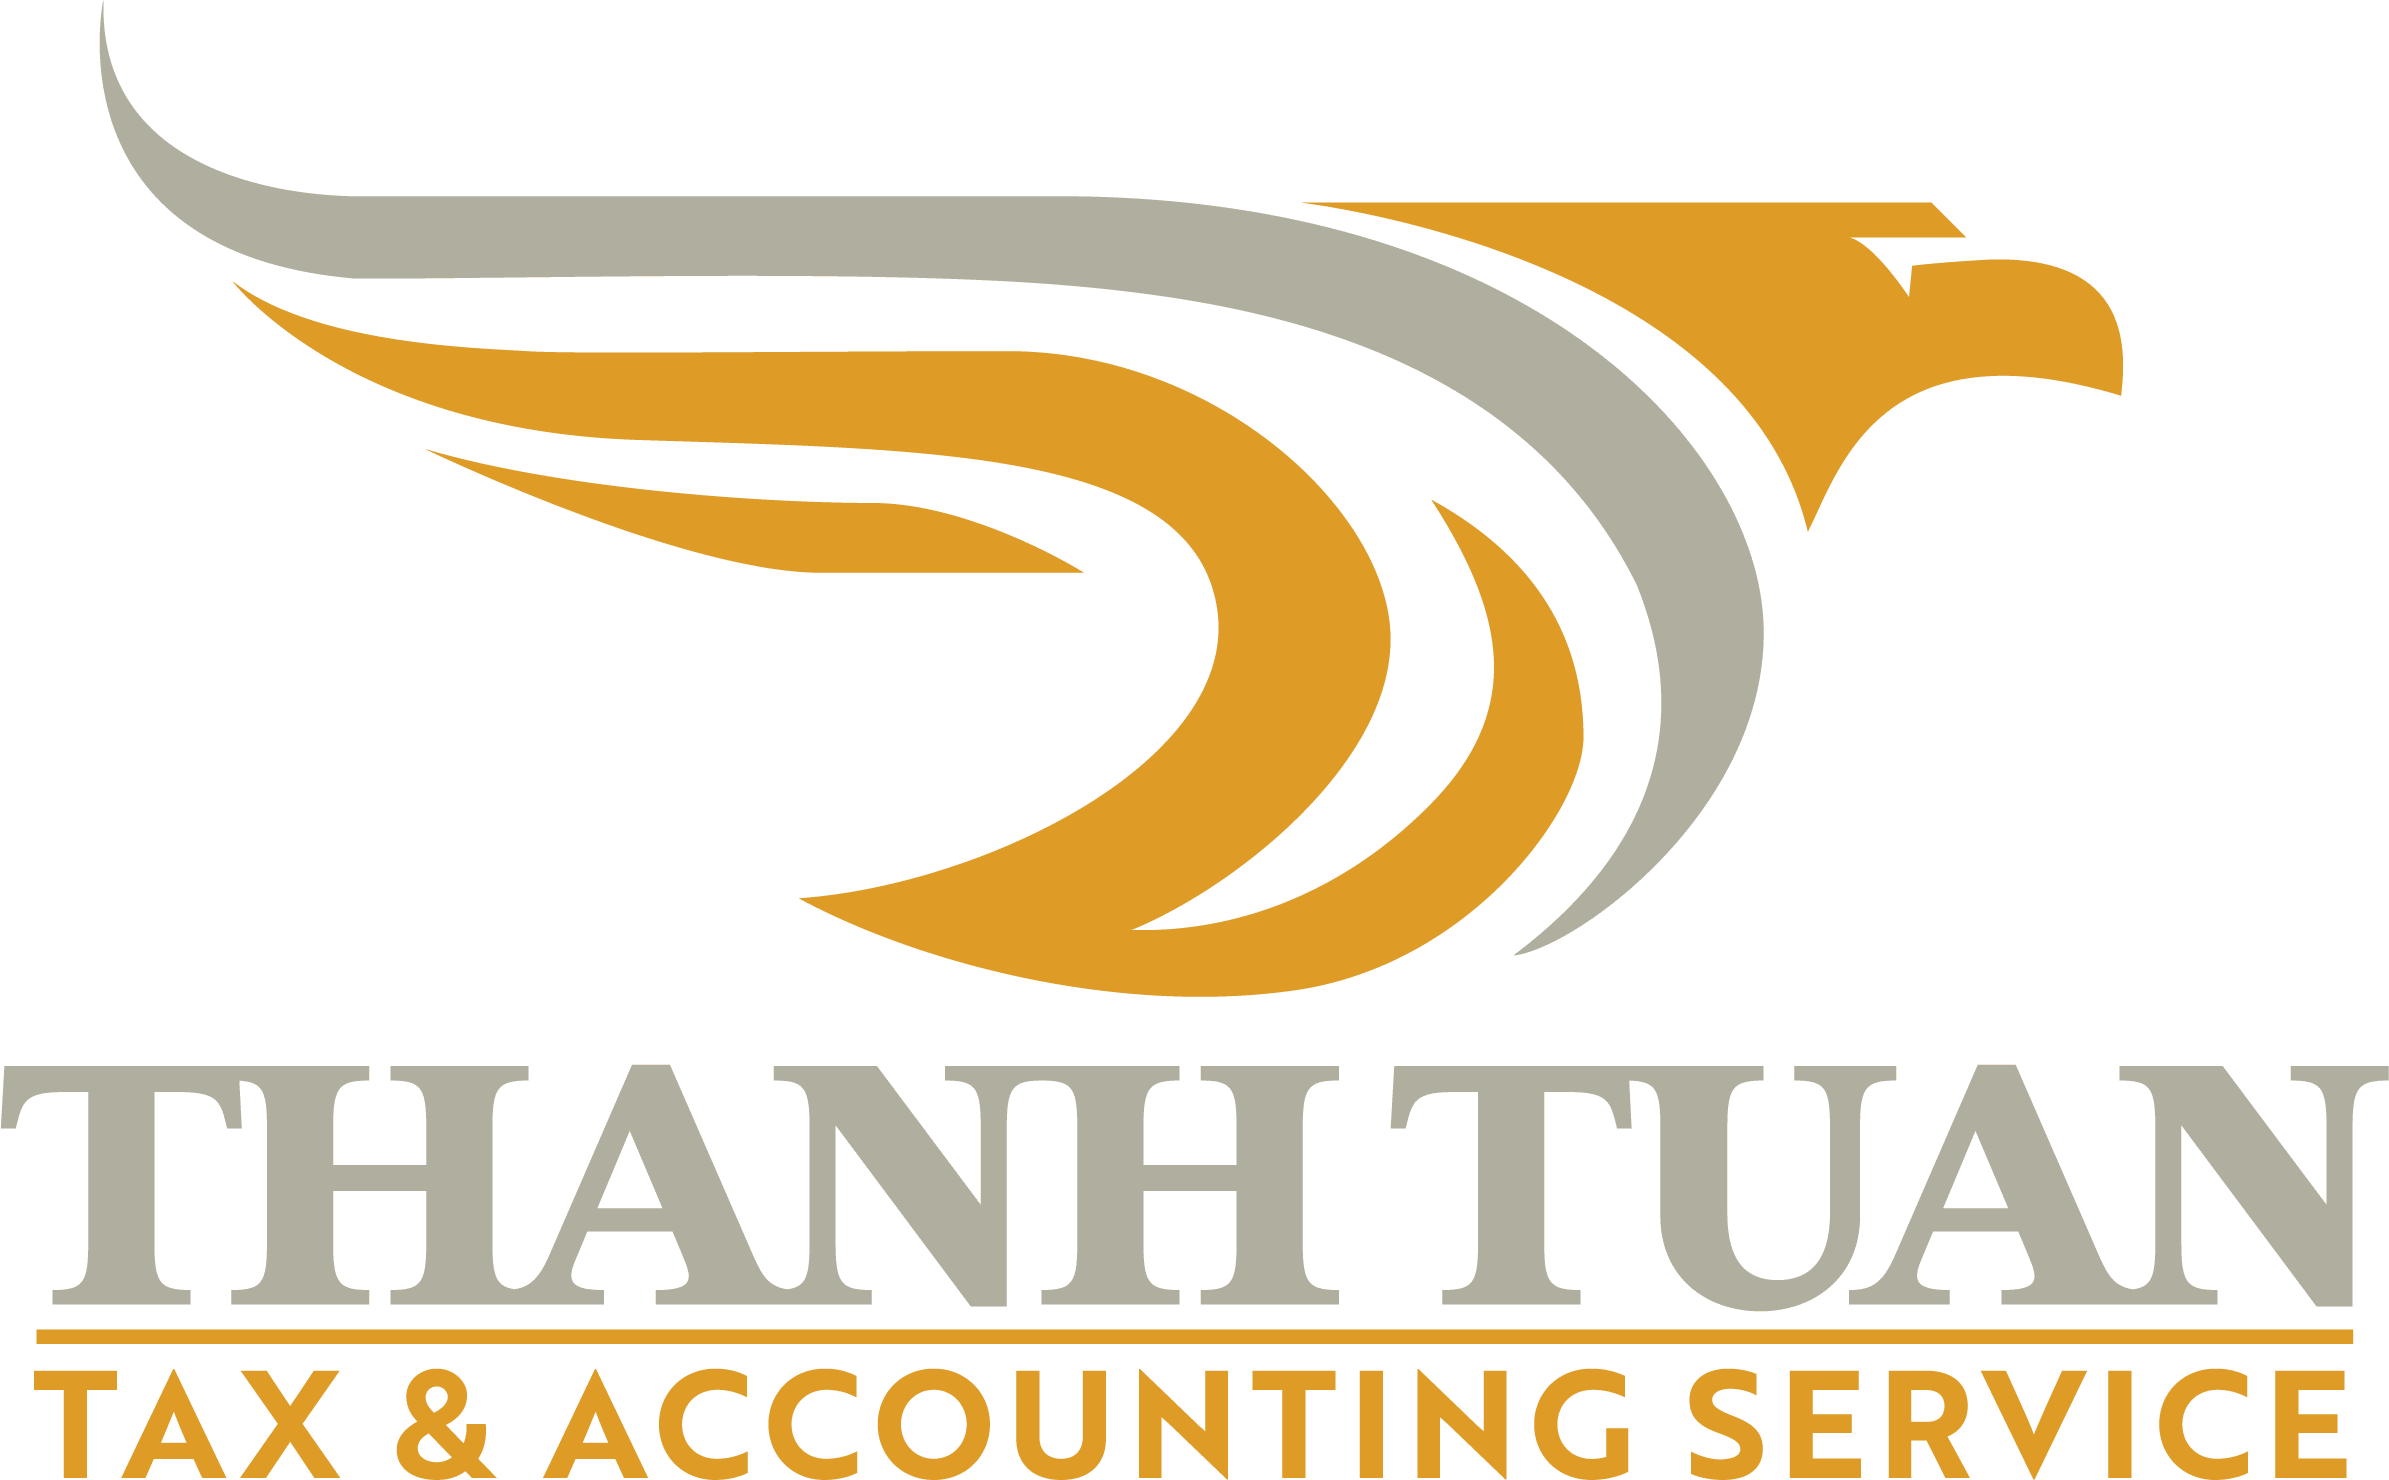 Thanh Tuan Tax & Accounting Service | Better Business Bureau® Profile